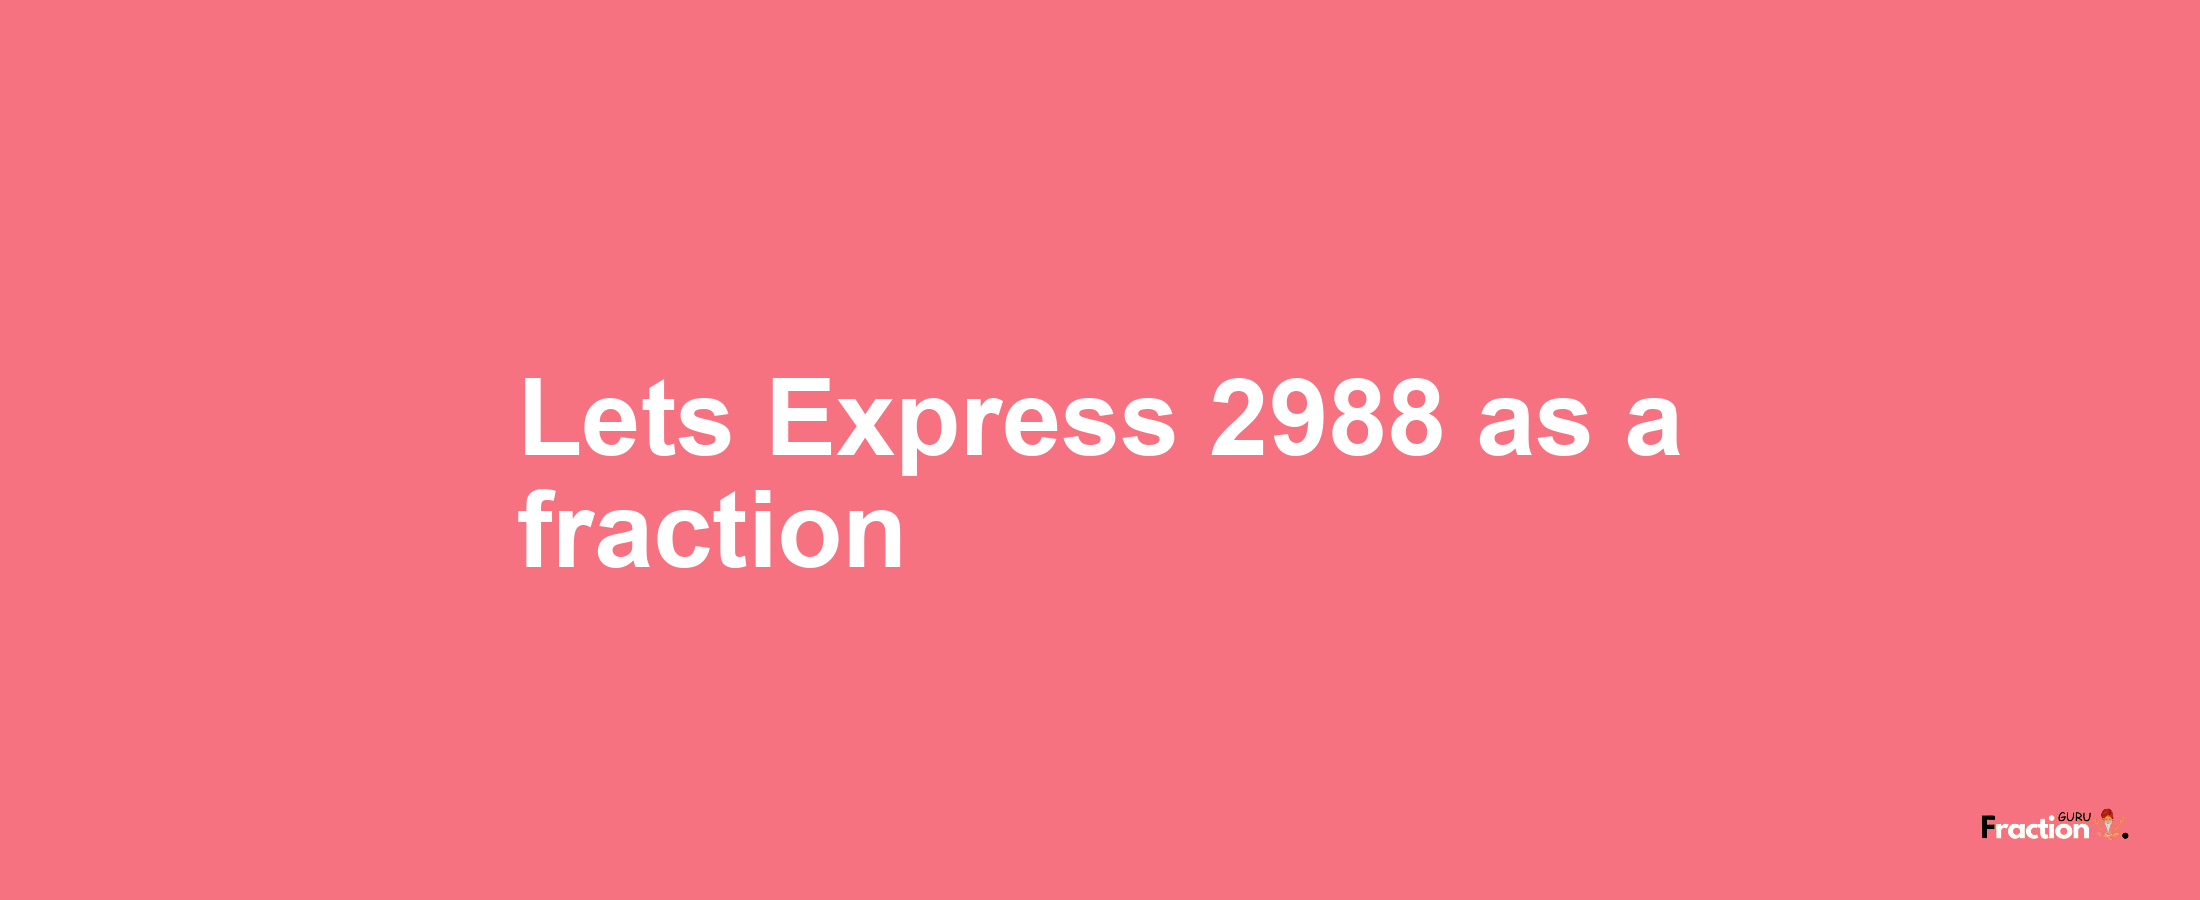 Lets Express 2988 as afraction